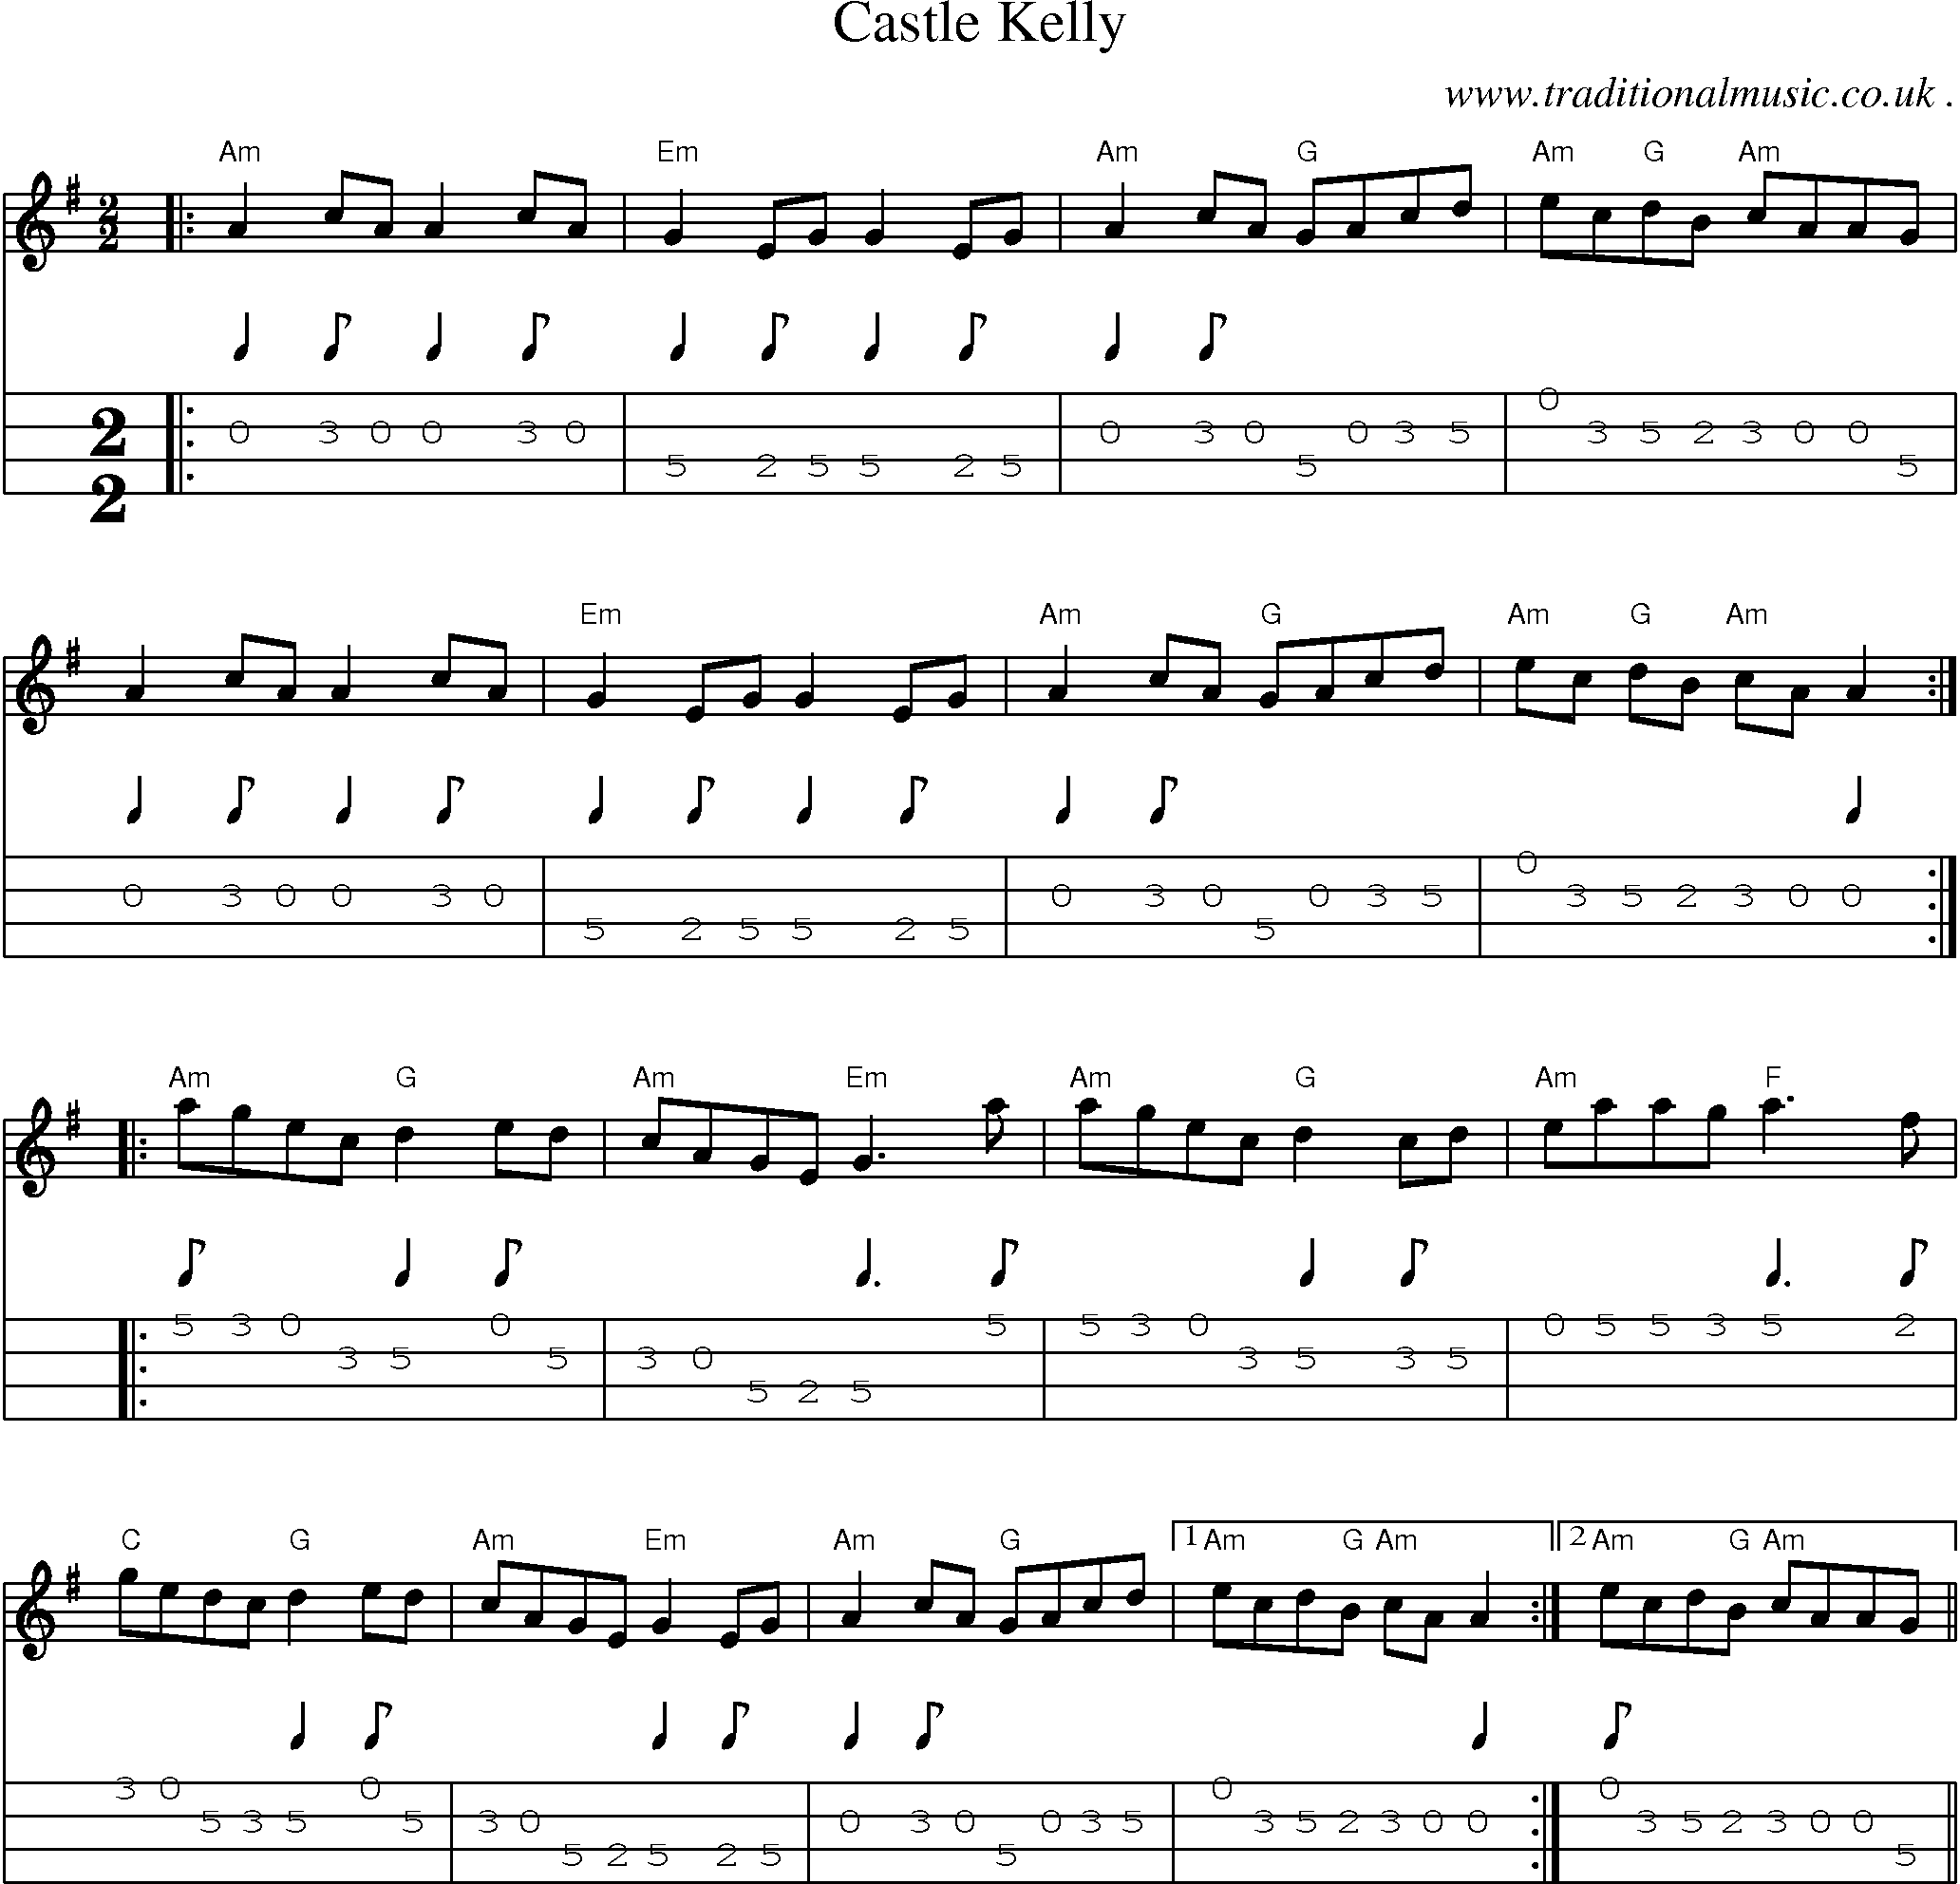 Music Score and Guitar Tabs for Castle Kelly